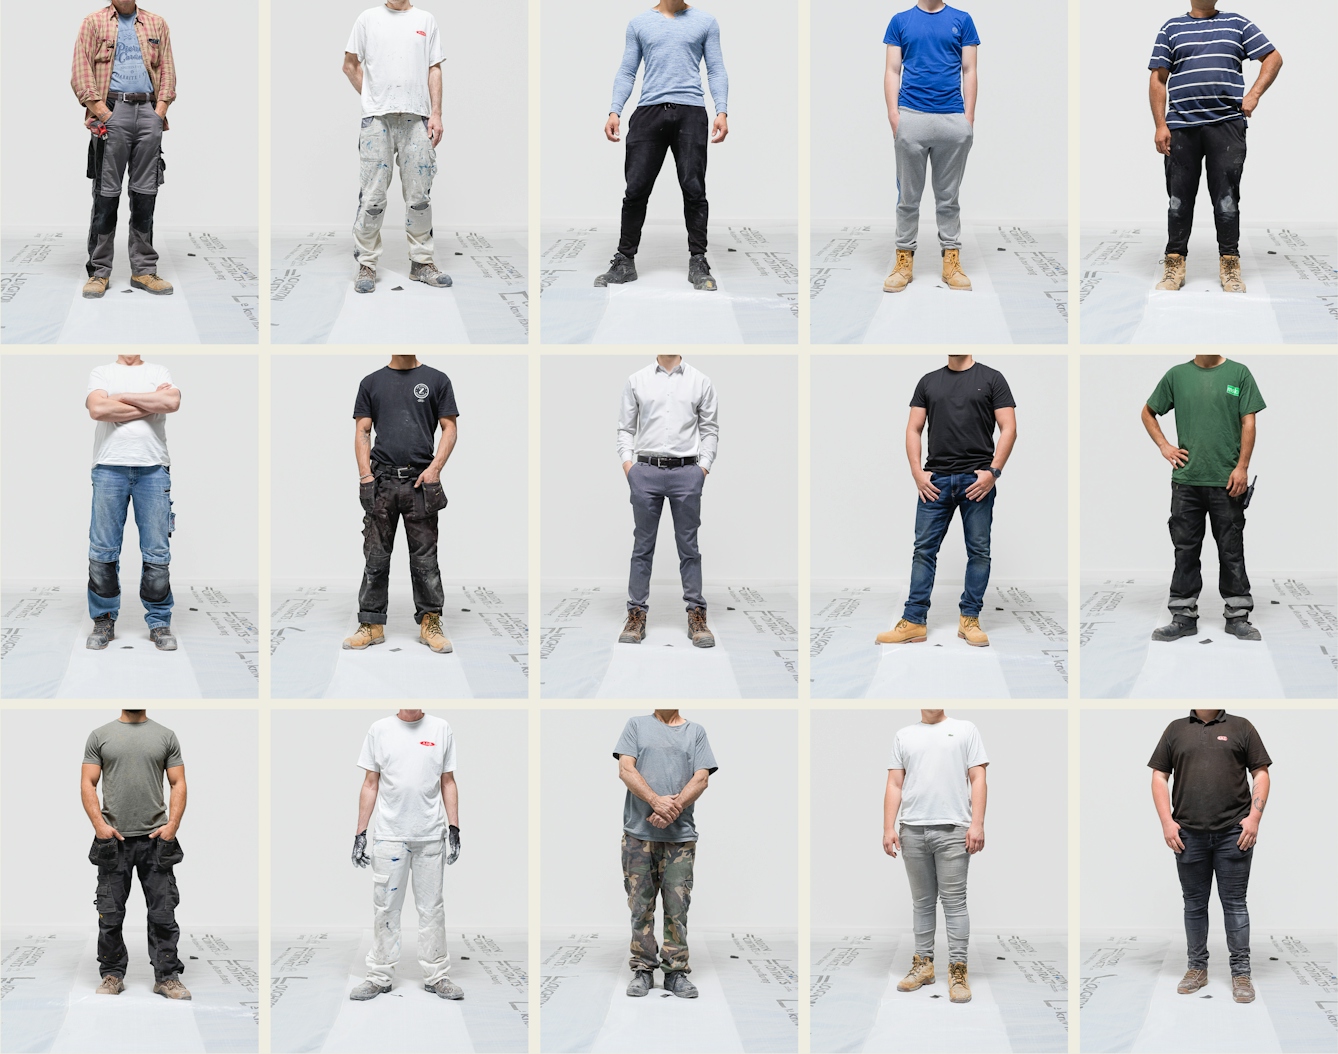 A five across by three down grid of photographs, each showing a male buildervfrom the neck down against a grey background. Each man is wearing a different outfit depending upon his trade.